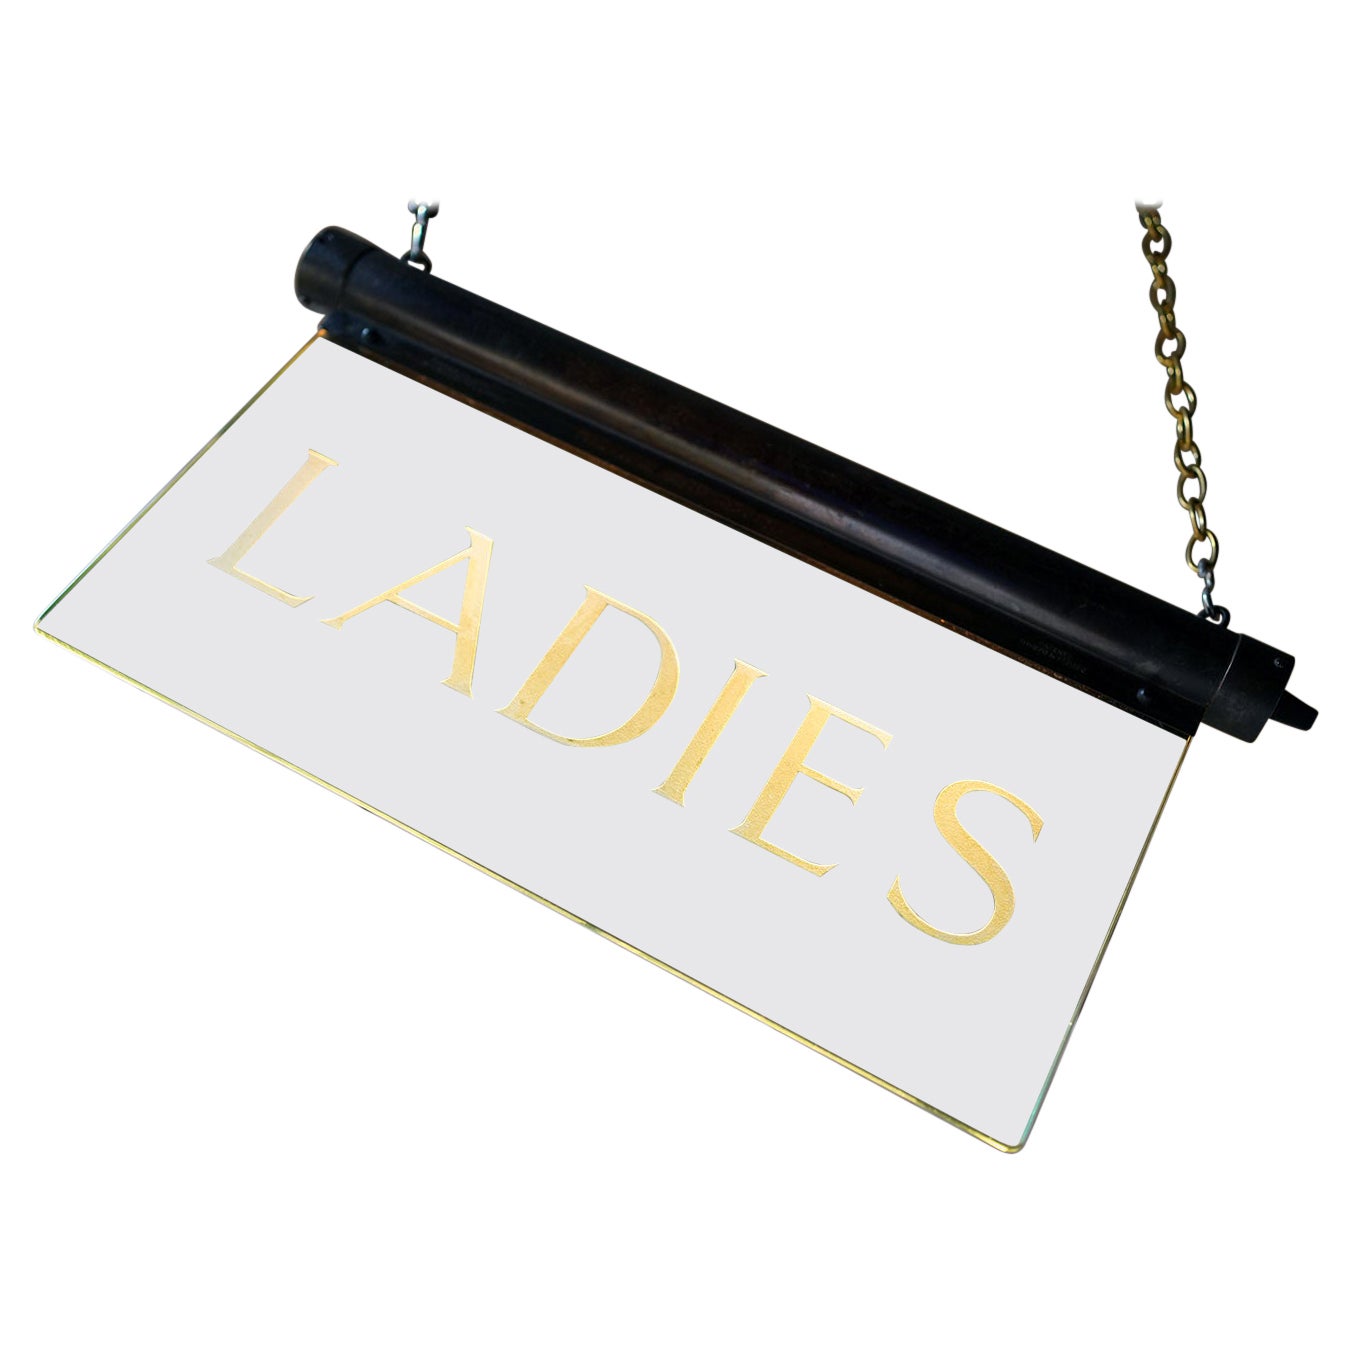 Art Deco Illuminated Etched Glass Foyer Restroom Sign, Ladies, by Internalite For Sale